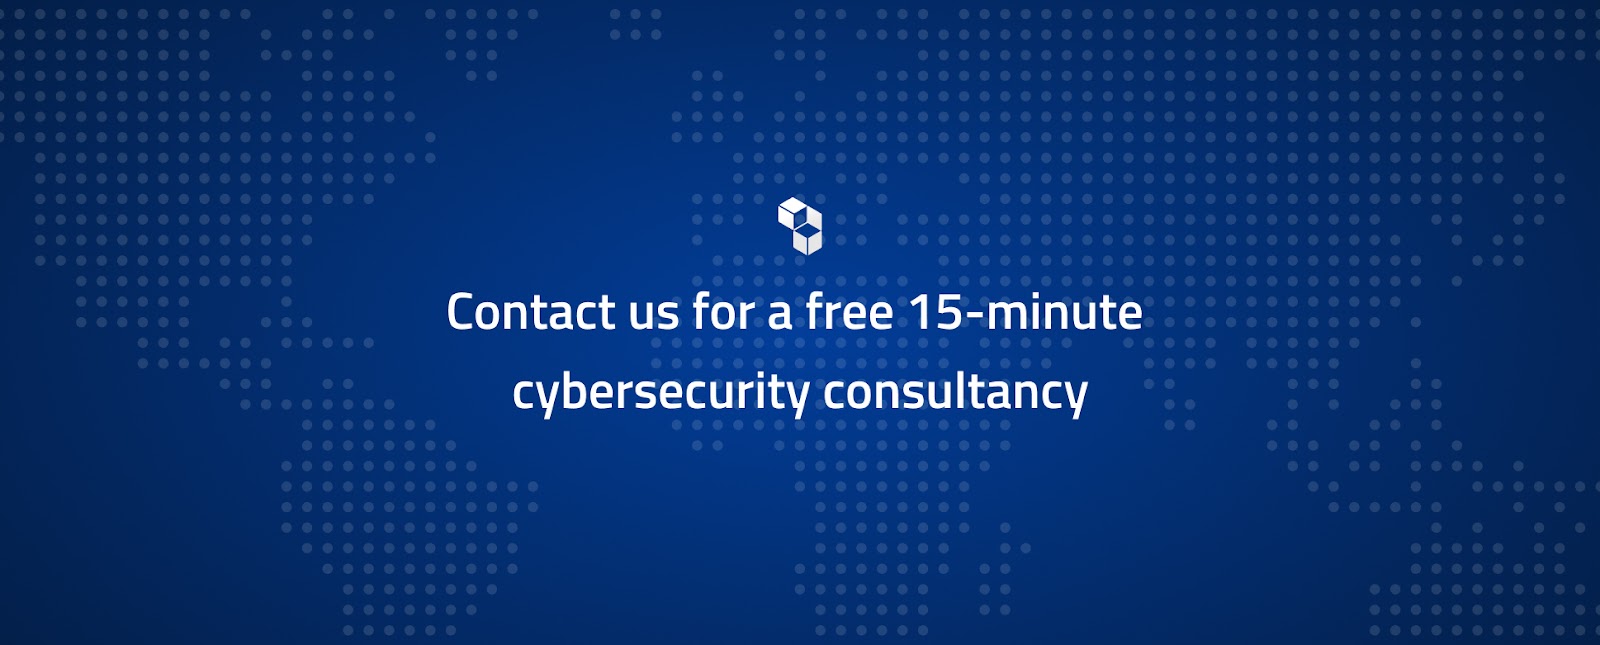 contact us for a free 15-minute cybersecurity consultancy